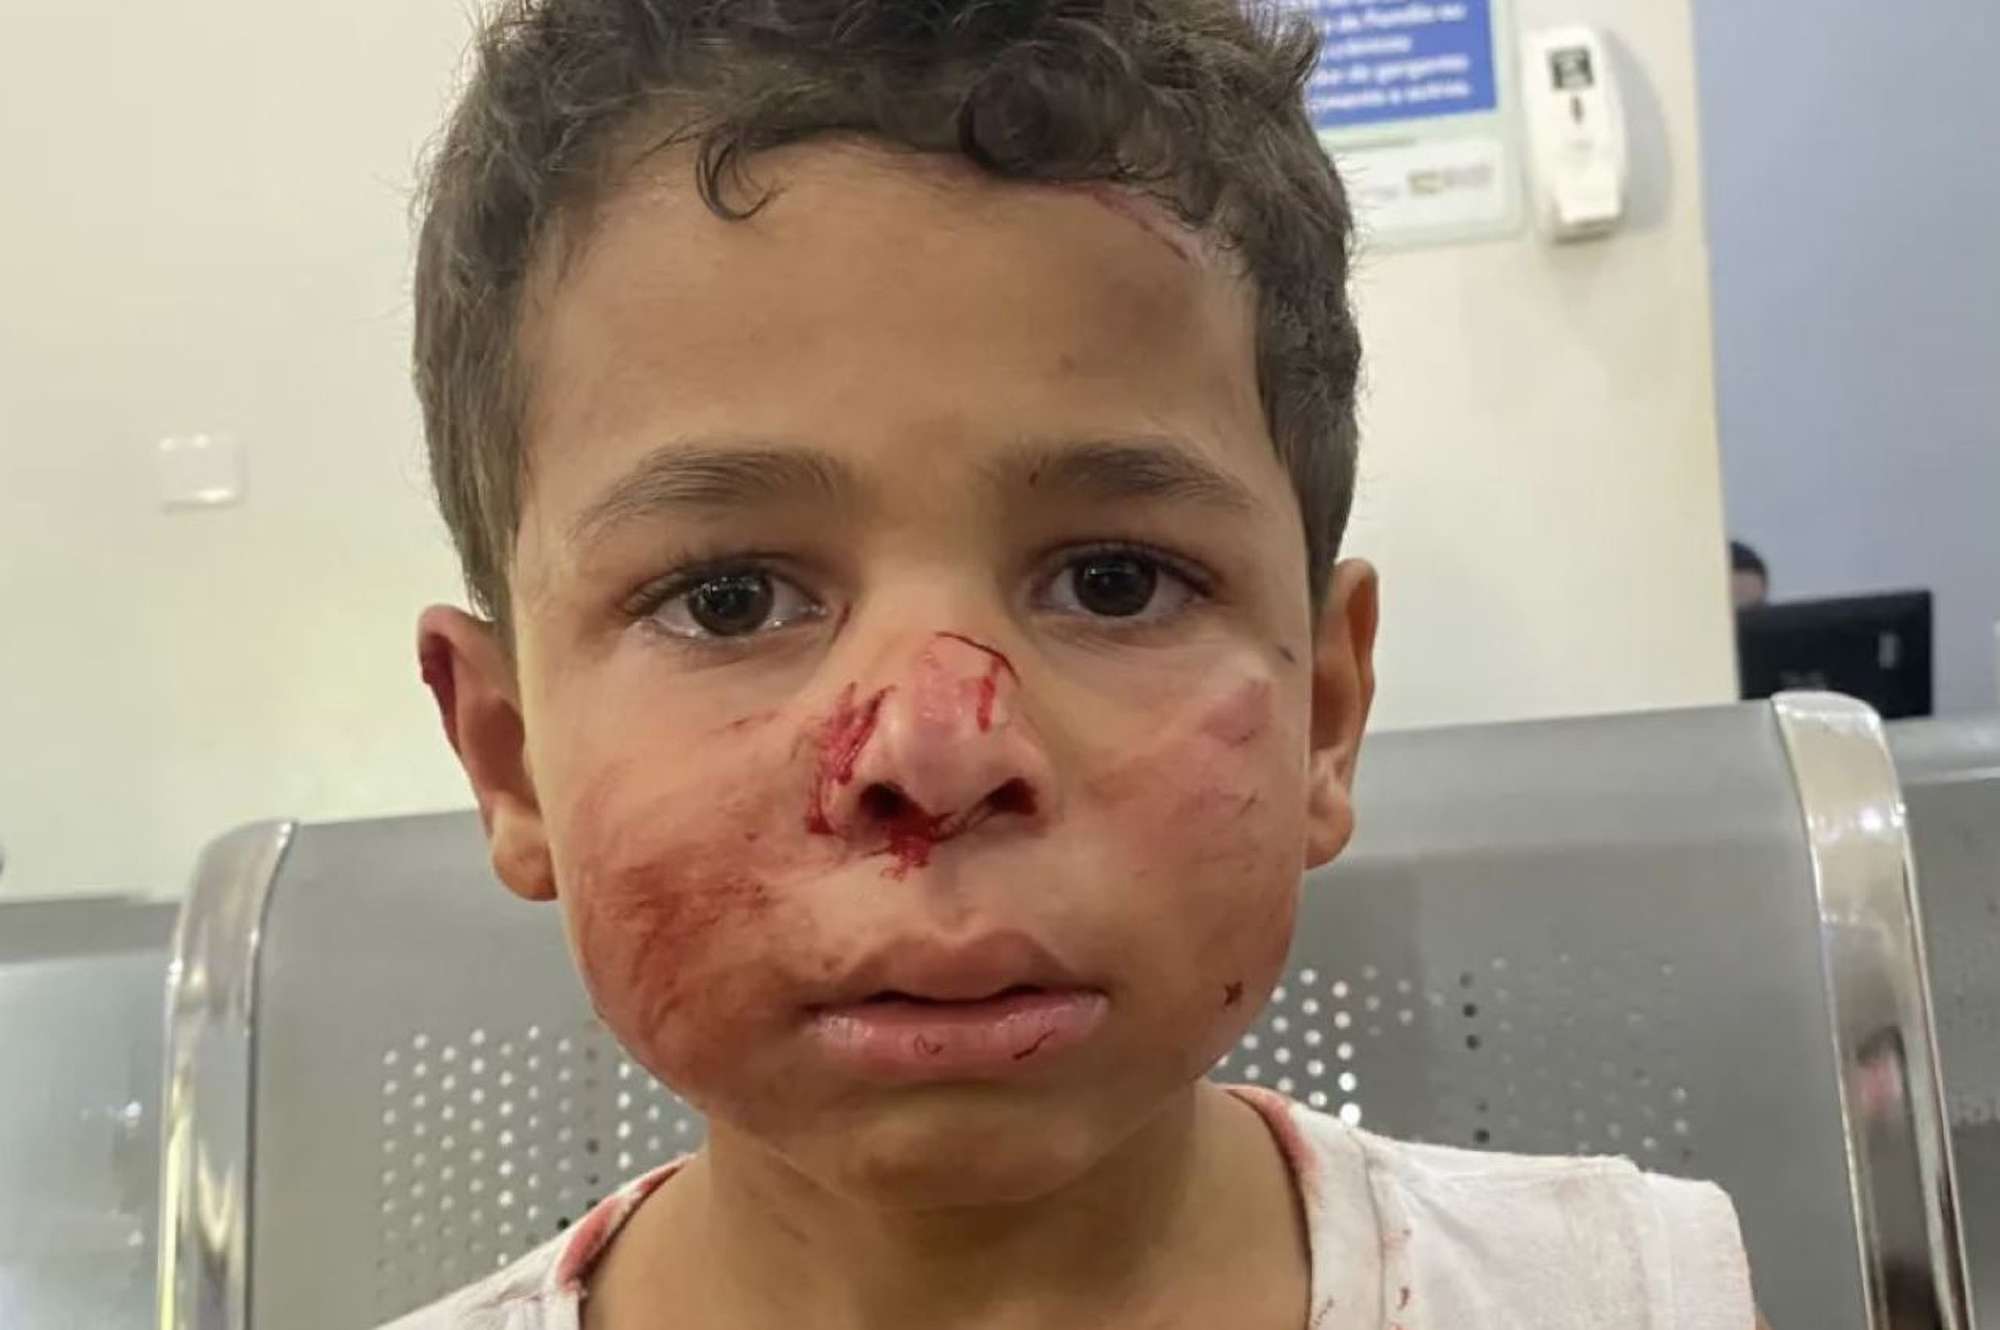 Read more about the article  Five-Year-Old’s Face Cut And Bloodied In Pit Bull Attack